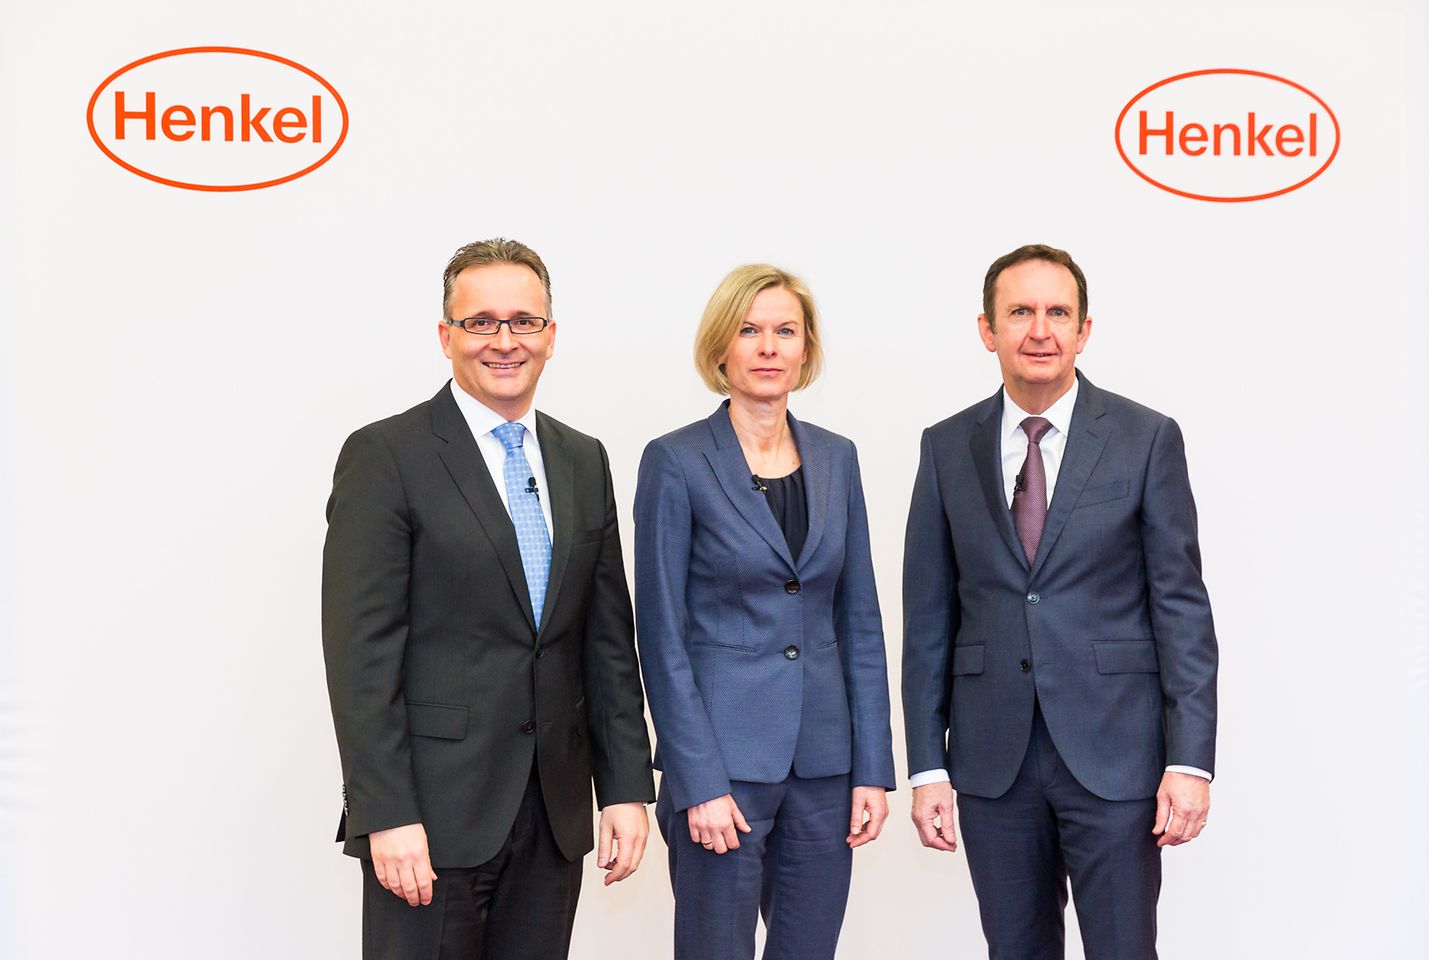 

At the press conference: CEO Hans Van Bylen, Kathrin Menges, Executive Vice President Human Resources, and CFO Carsten Knobel (from right)